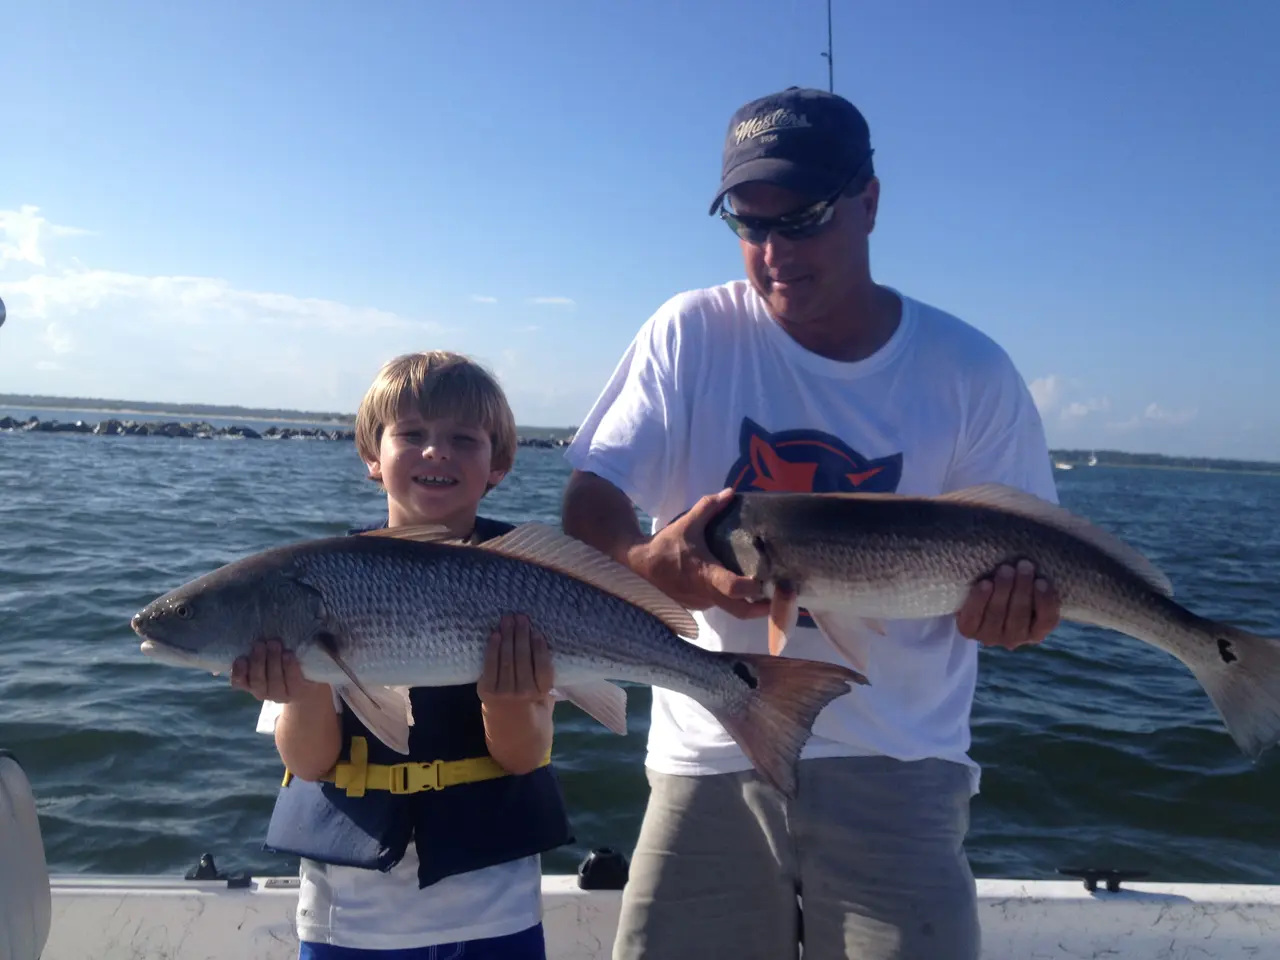 The Ultimate Guide to Inland and Offshore Fishing in Myrtle Beach